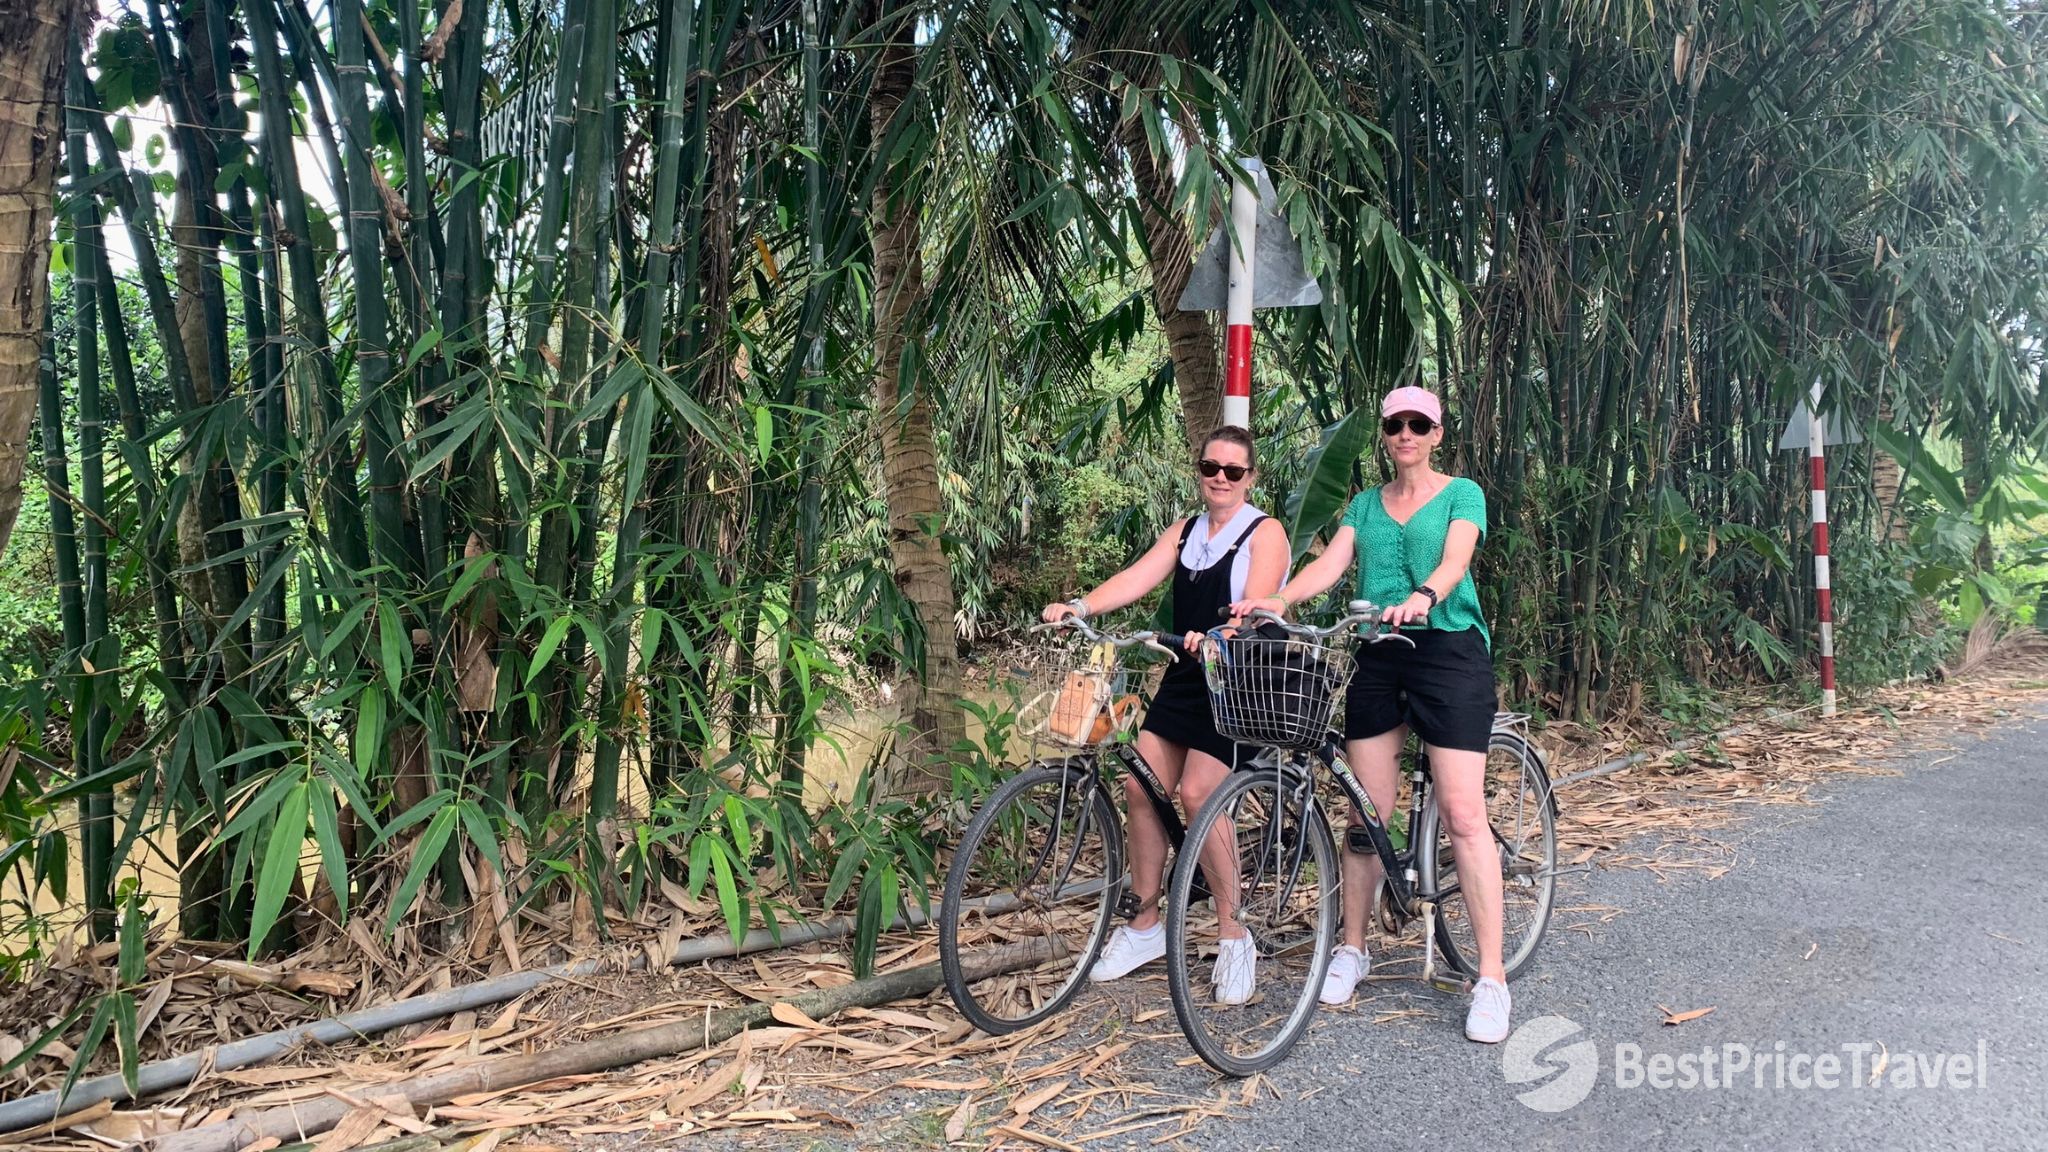 Day 11 Bike Through The Tranquil Countryside Of Mekong Delta